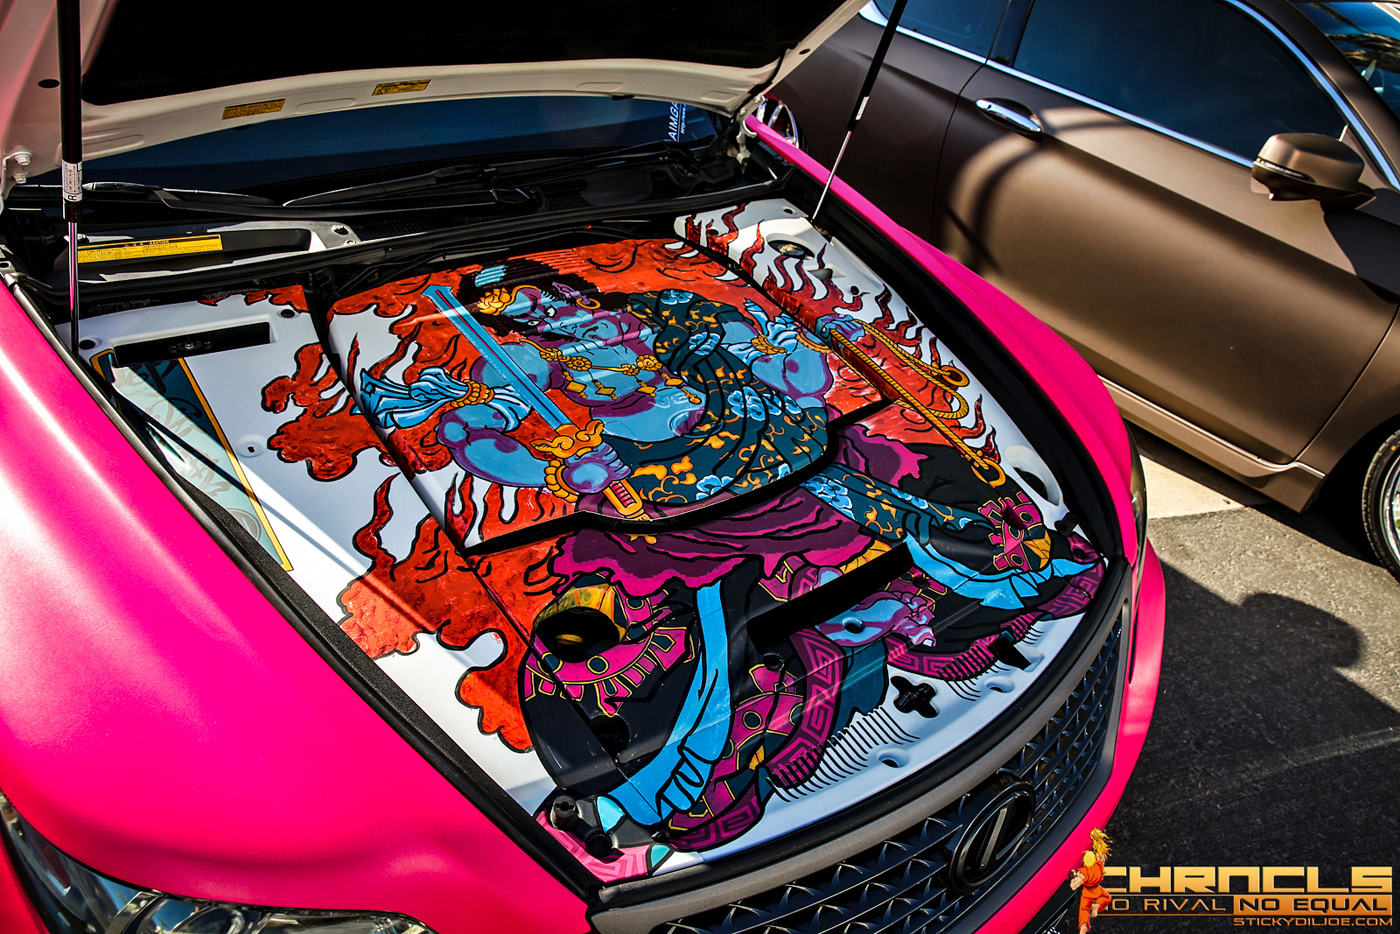 ls460 engine cover at vip fest 2014